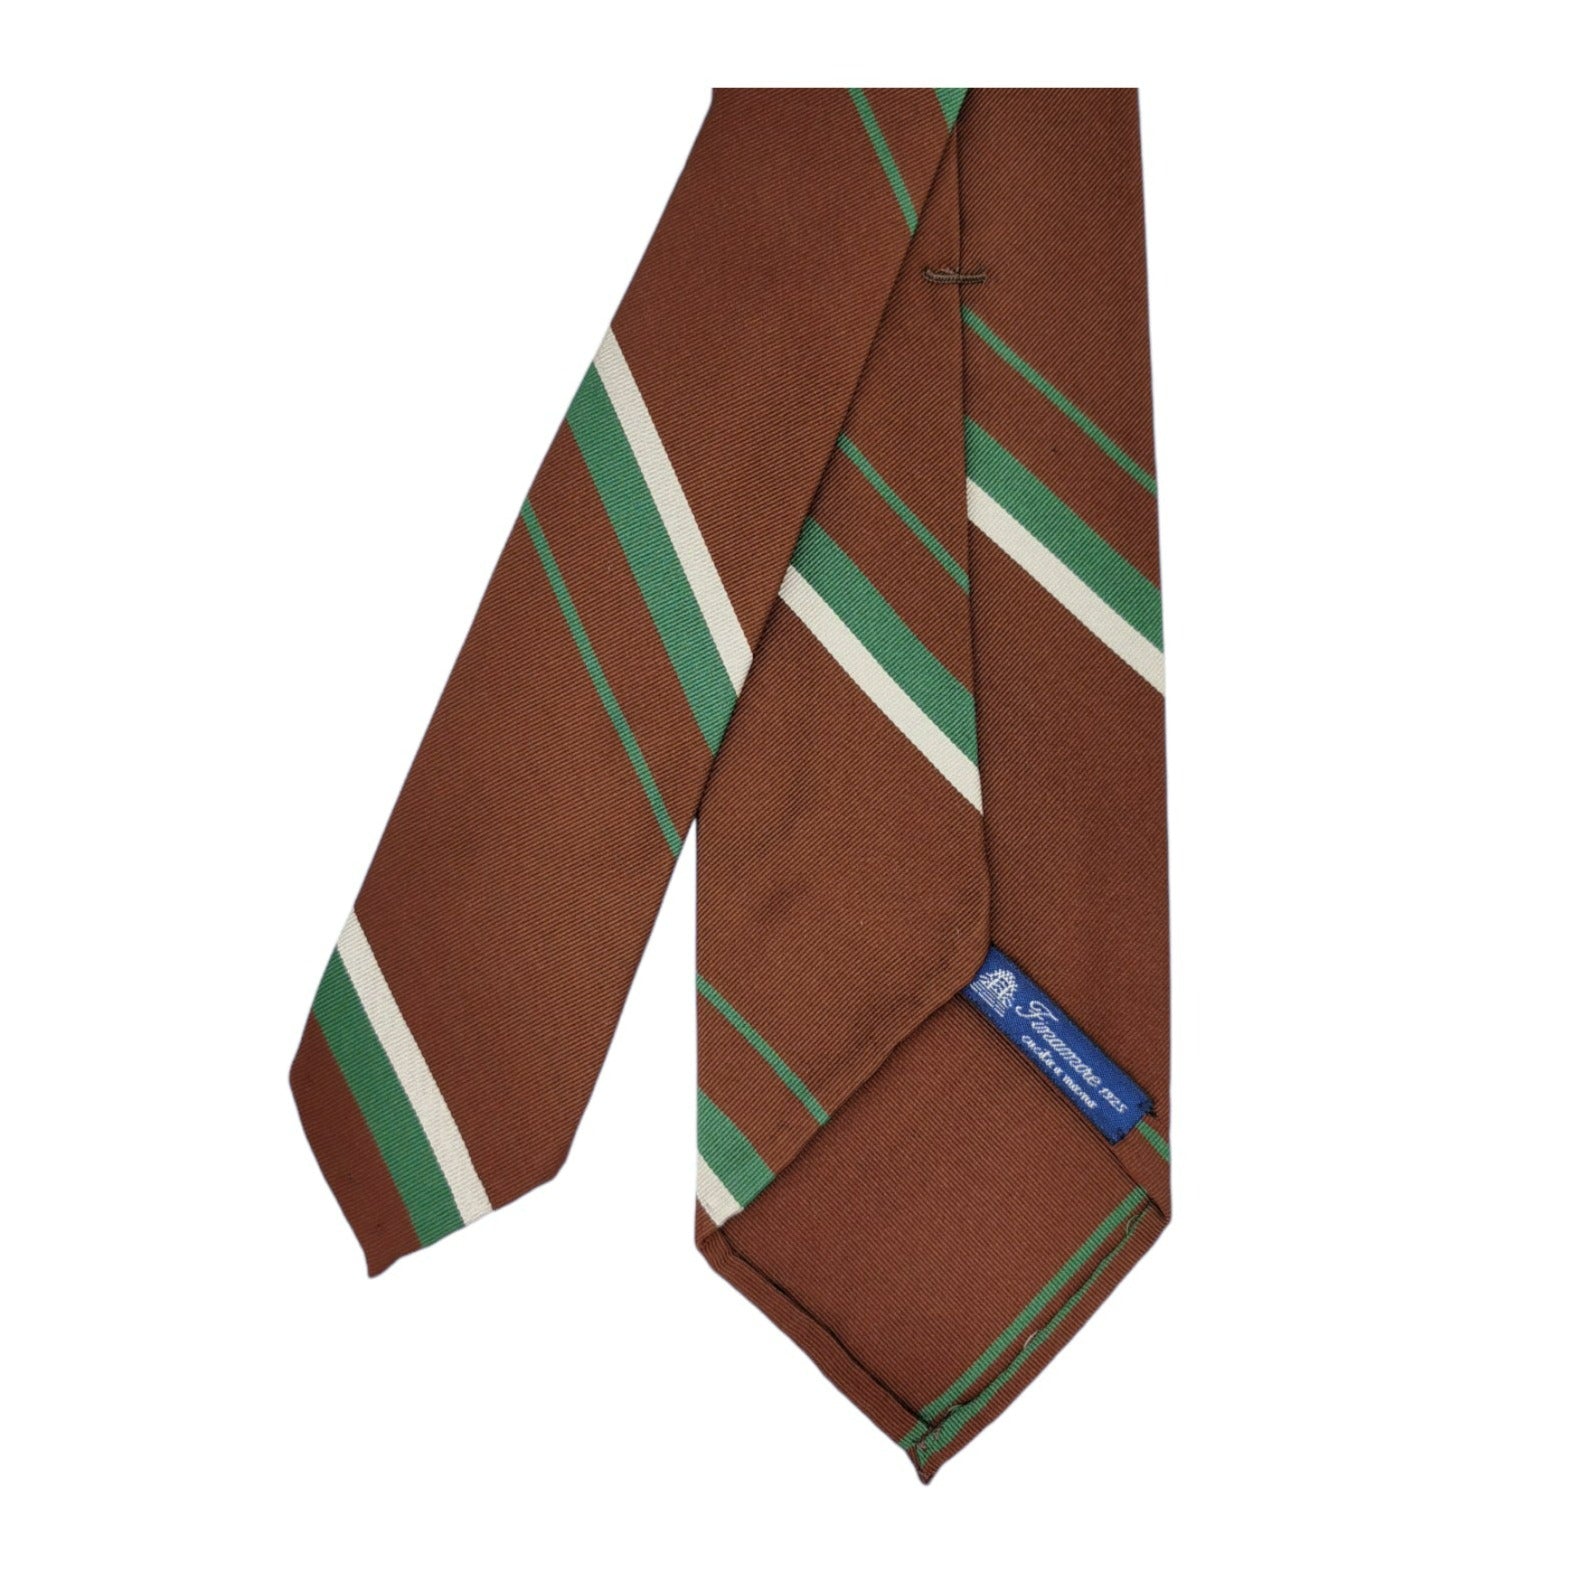 Anversa tie brown background white and green stripes